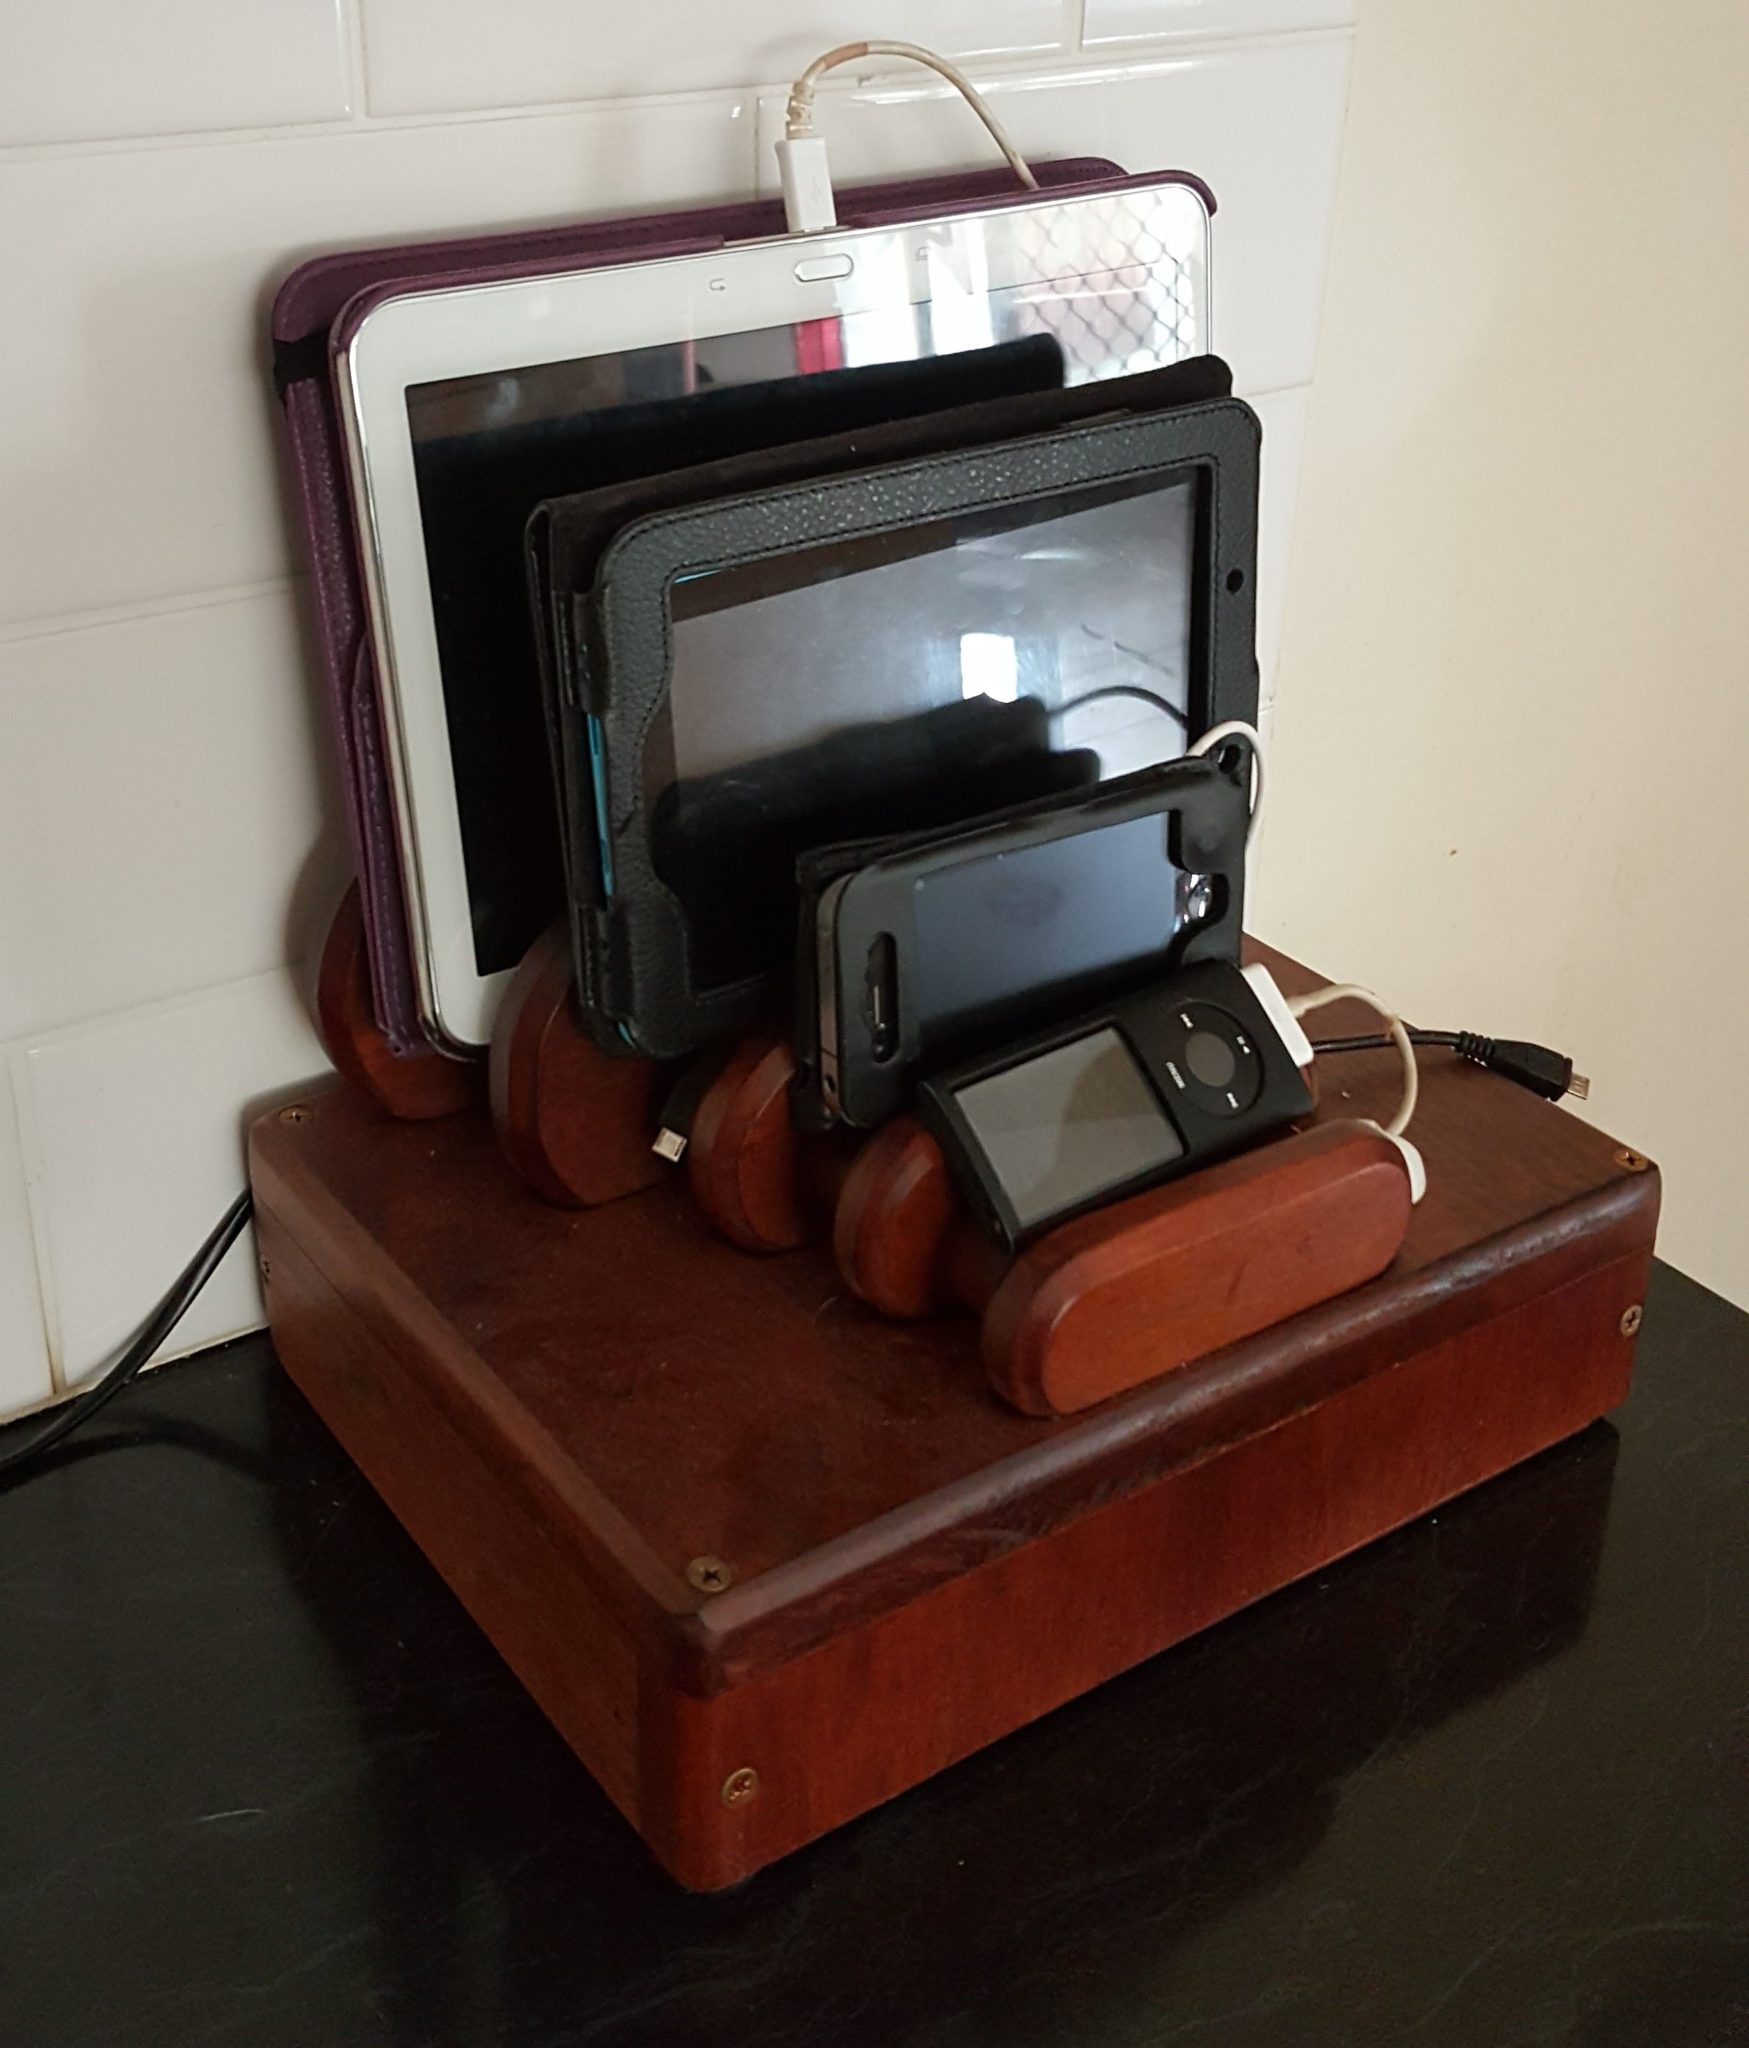 How to make a charger station